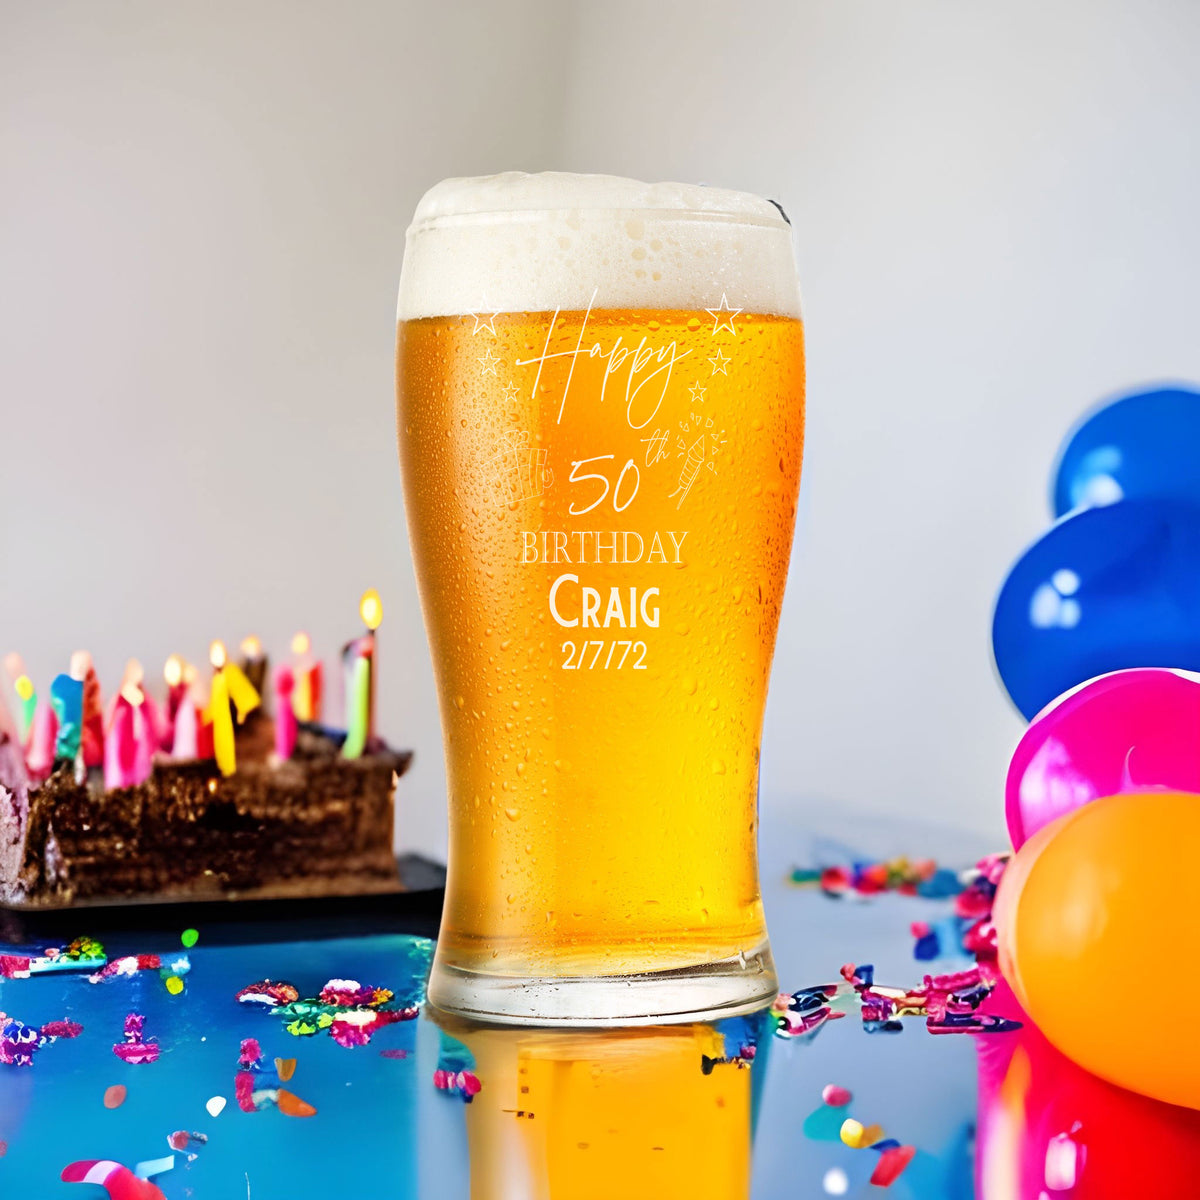 50th Birthday Personalised Beer Glasses Gift for Him with Star Design